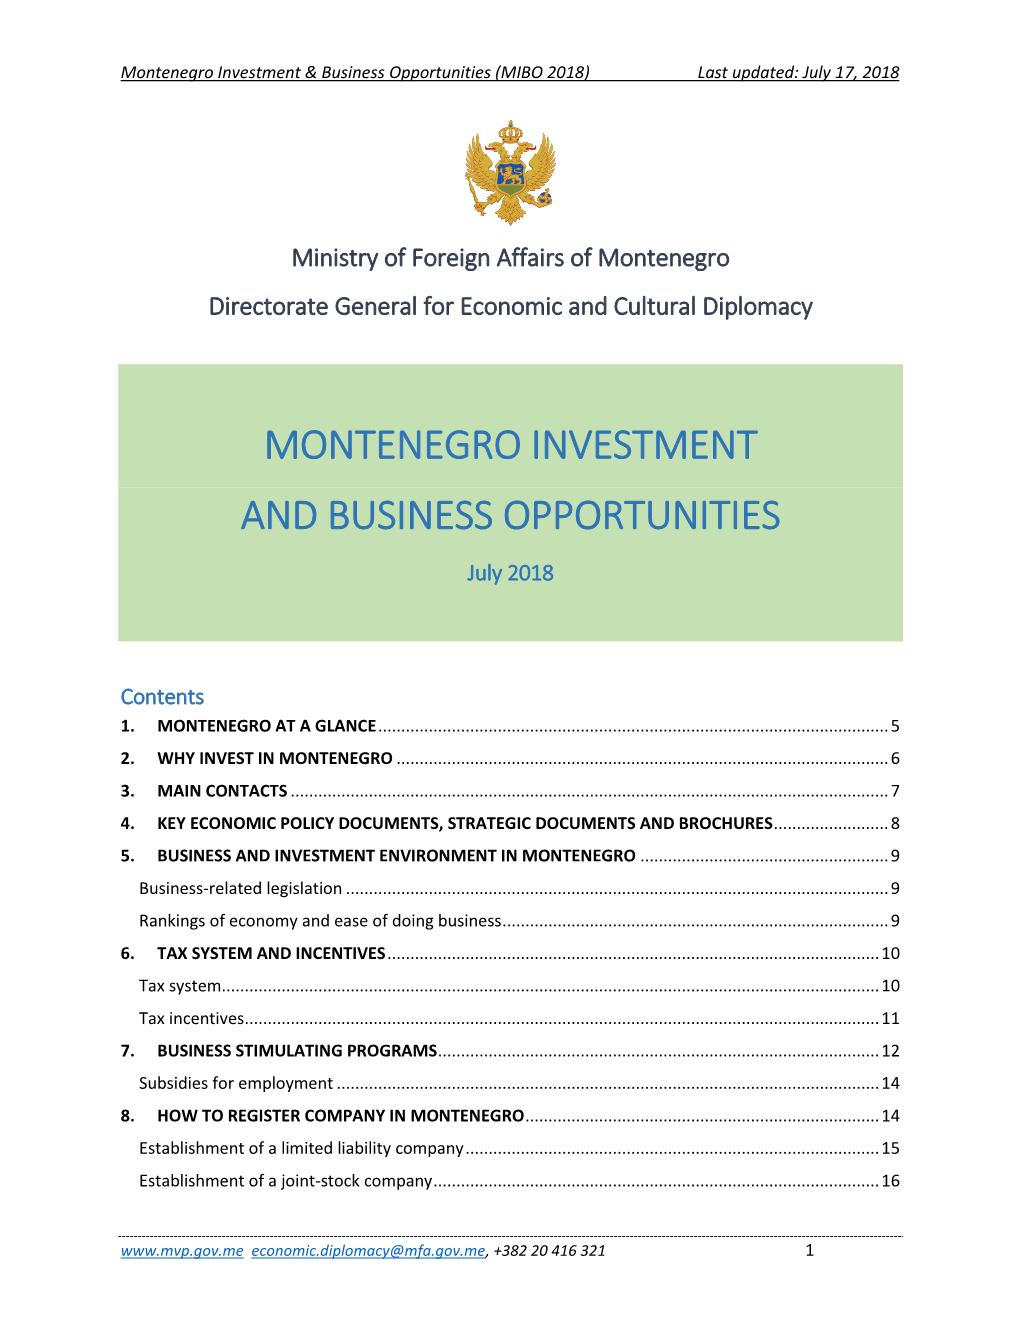 MONTENEGRO INVESTMENT and BUSINESS OPPORTUNITIES July 2018